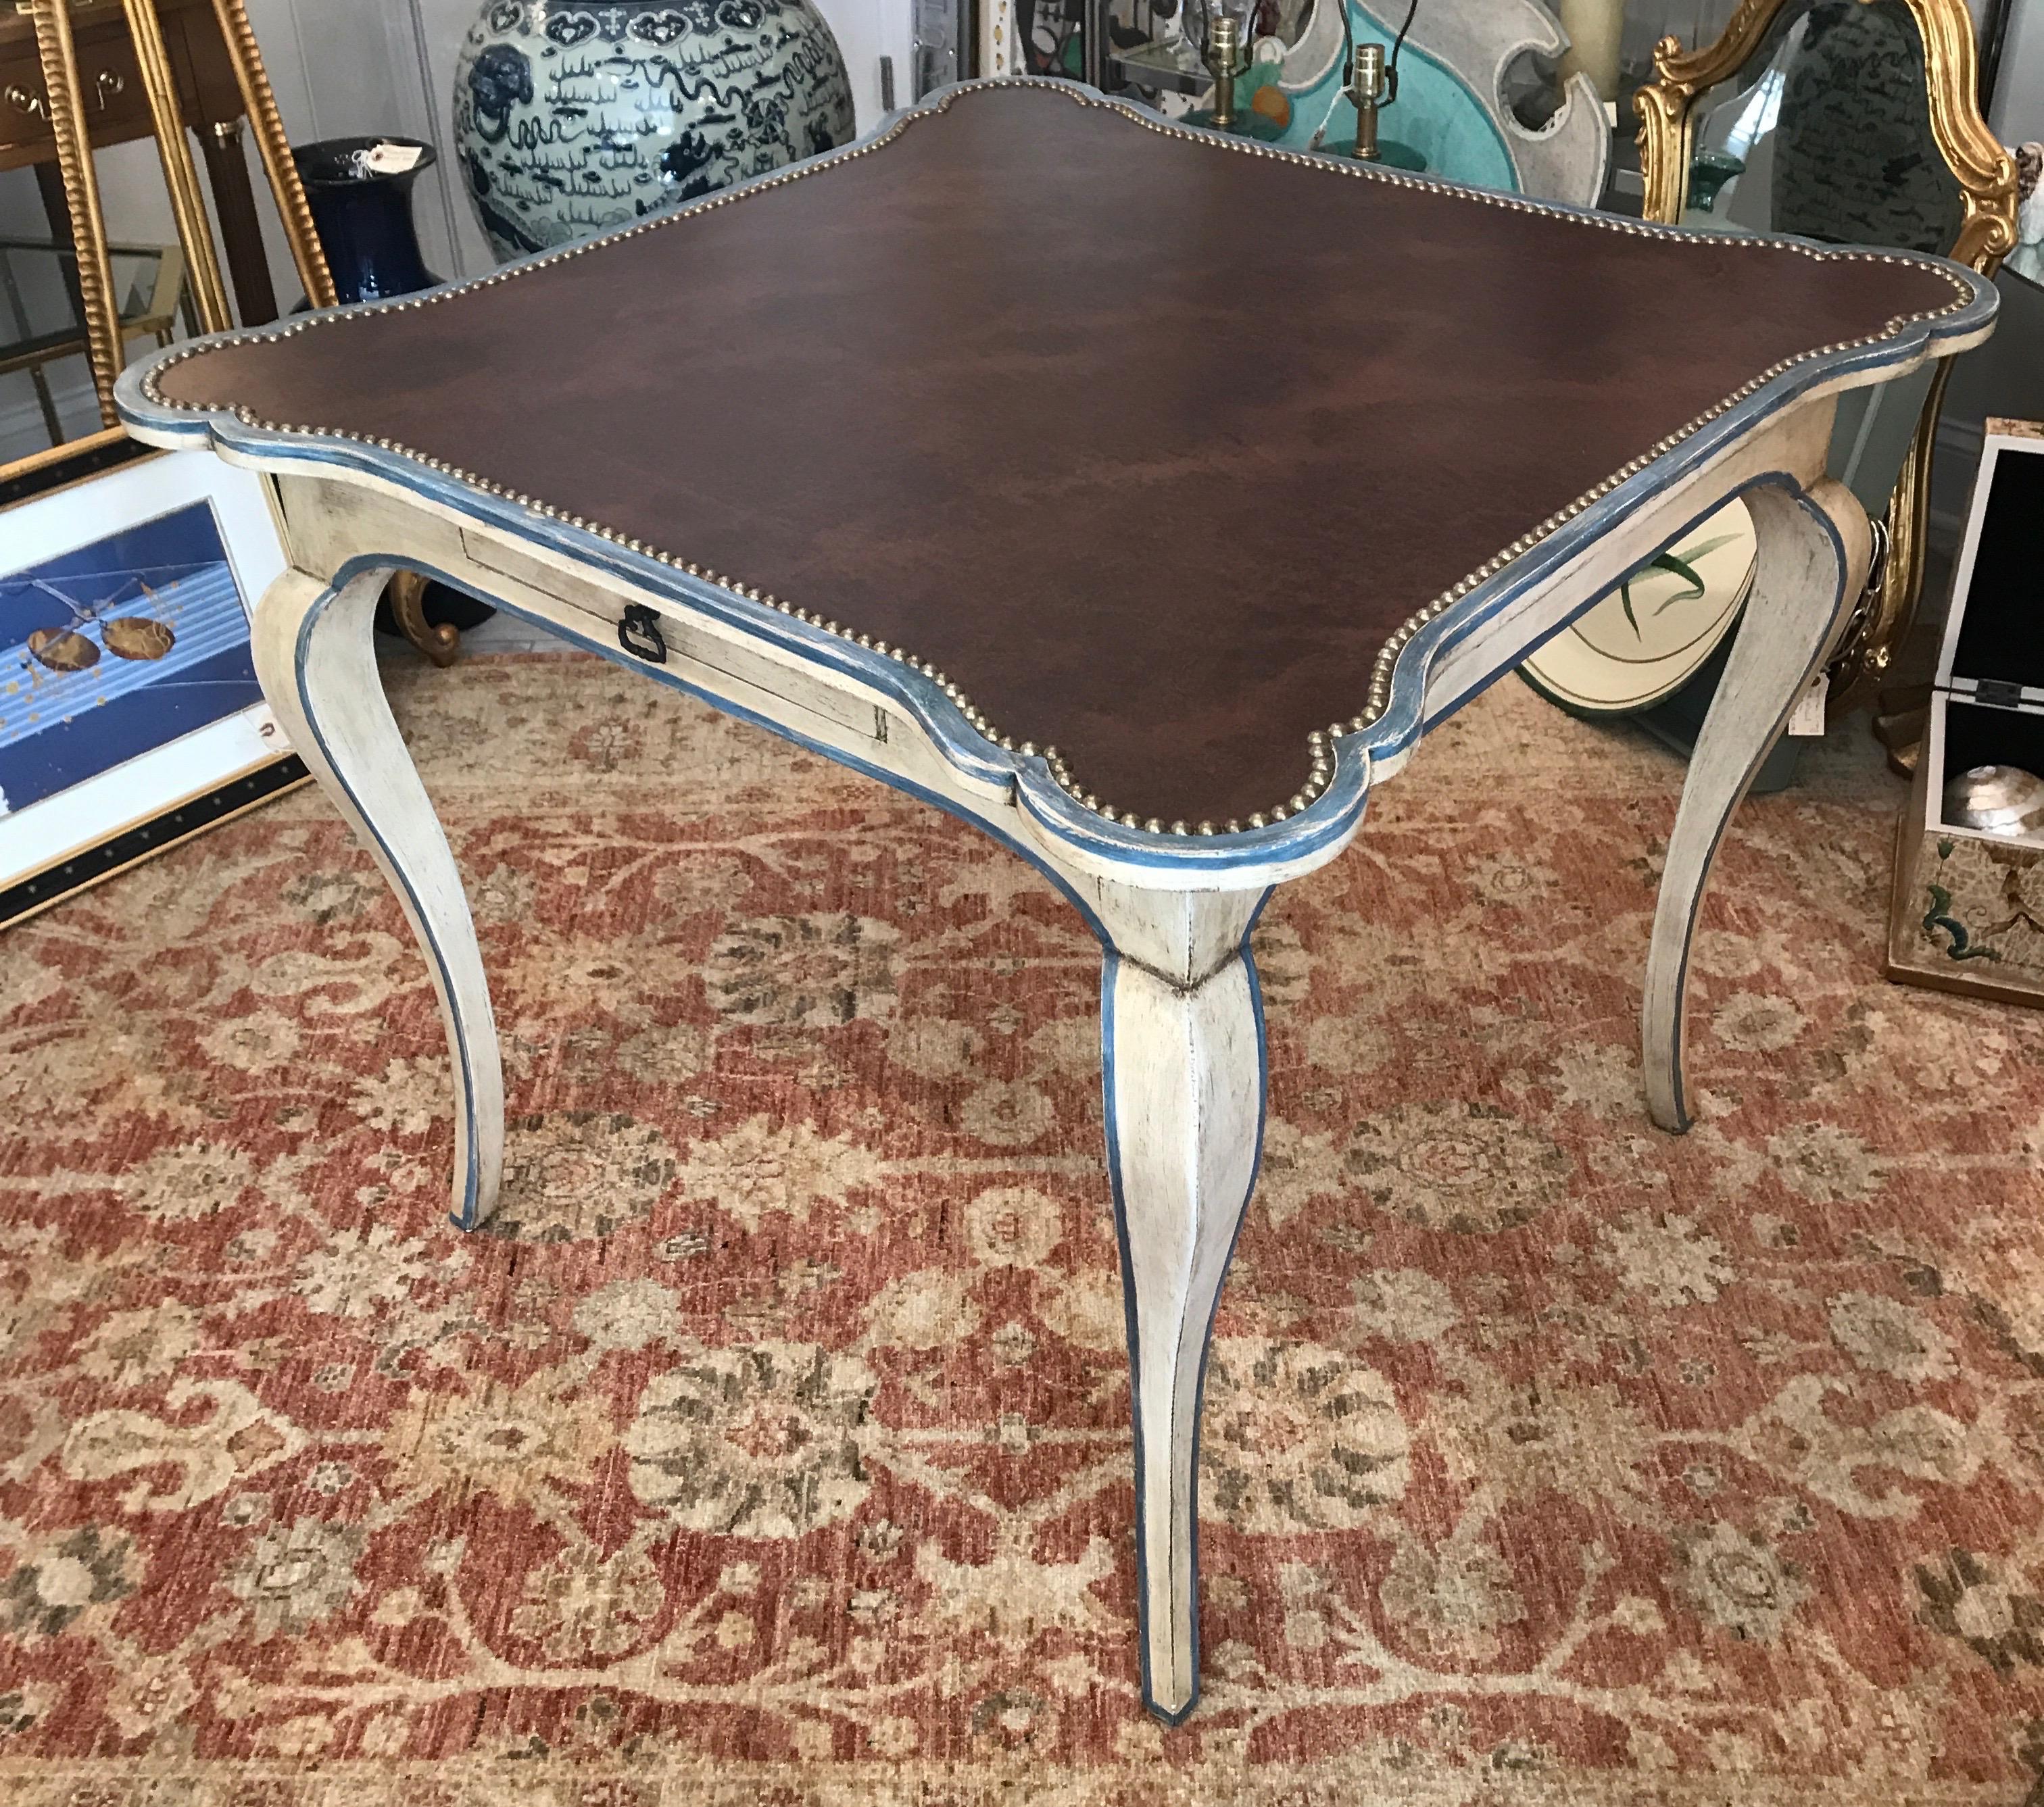 Minton Spidell cabriolet leg country French game table with leather top and studs. Antique white and blue painted finish.